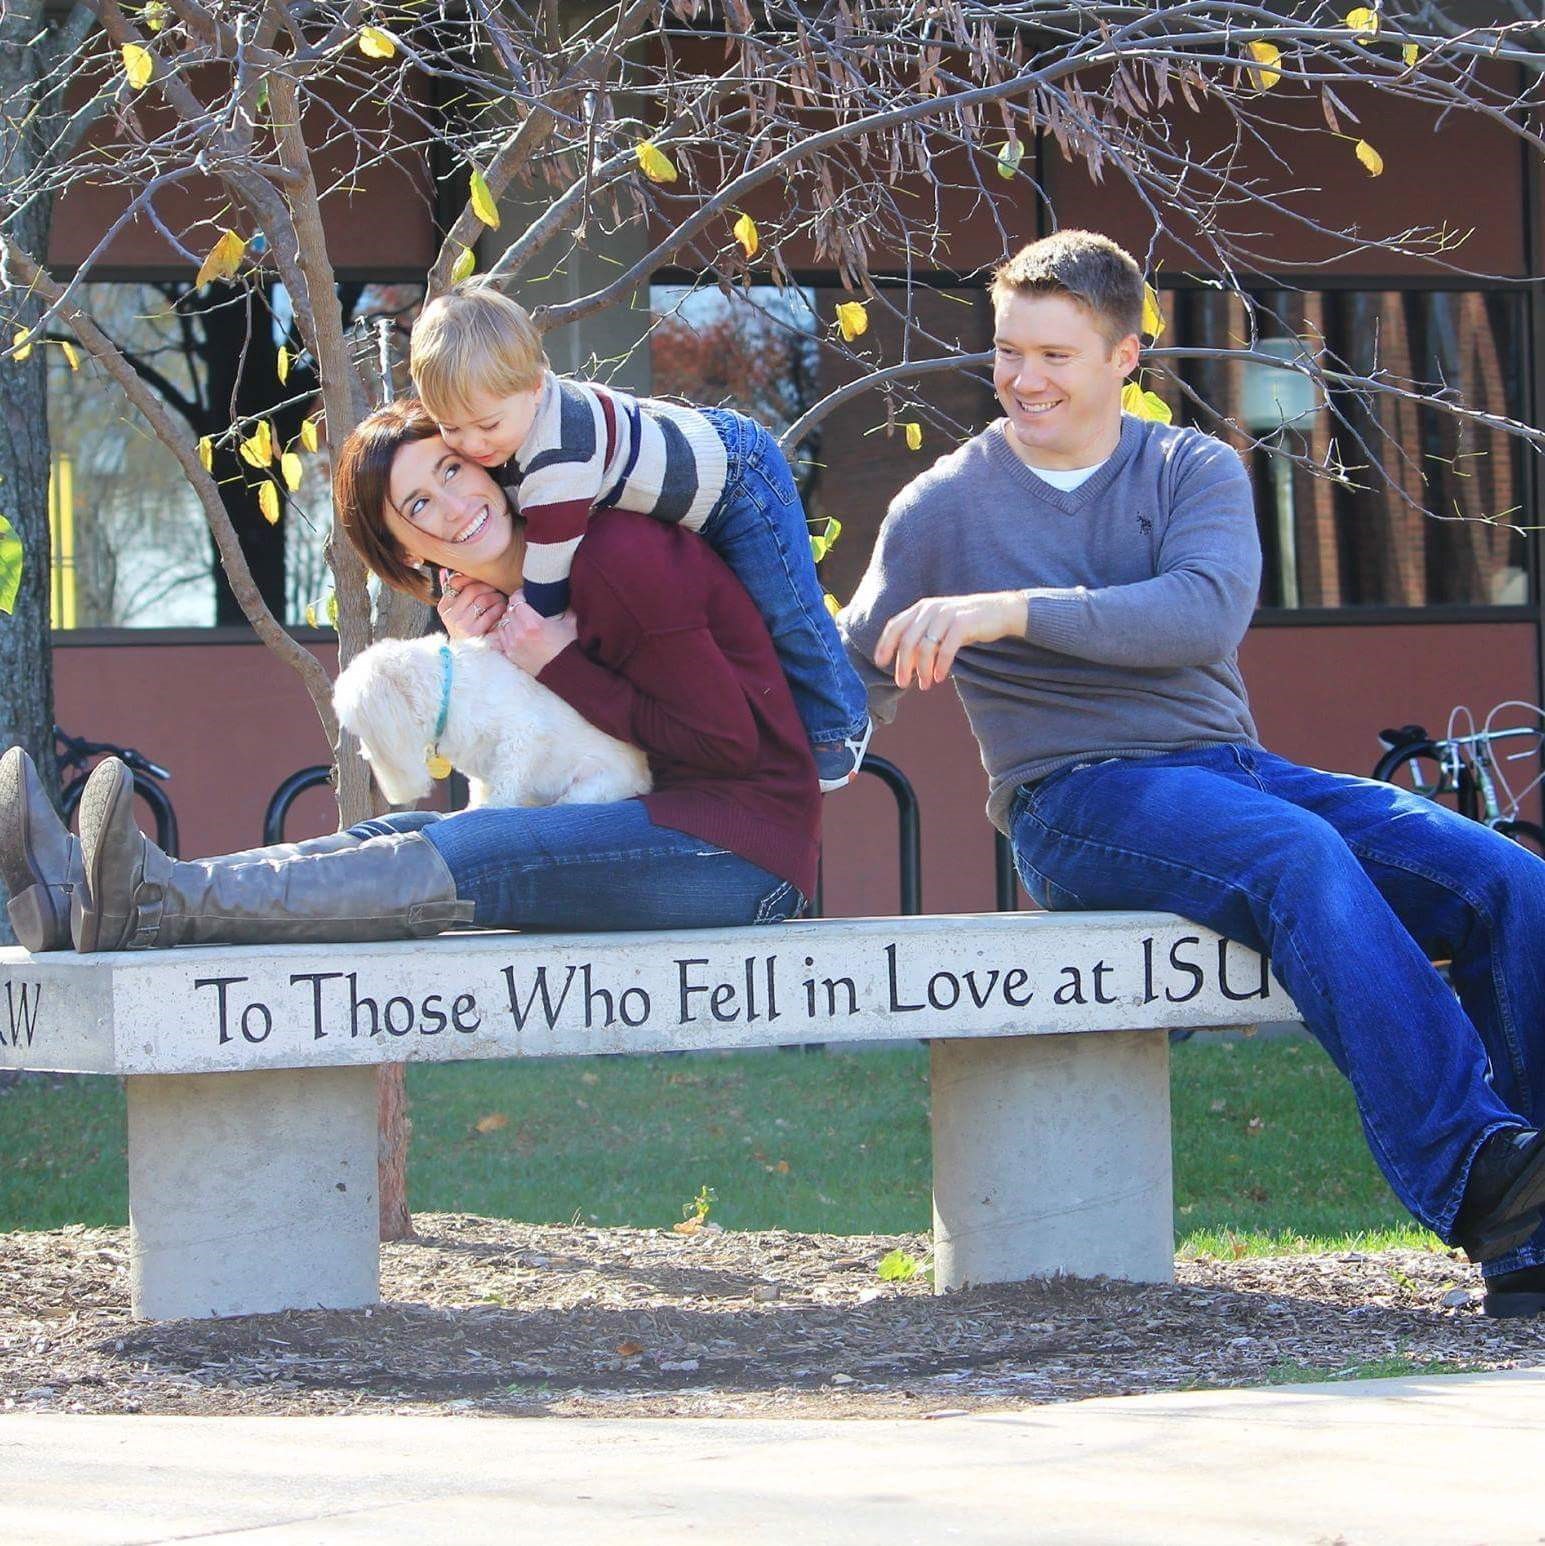 Christy and Chris McFarland and family at the love bench